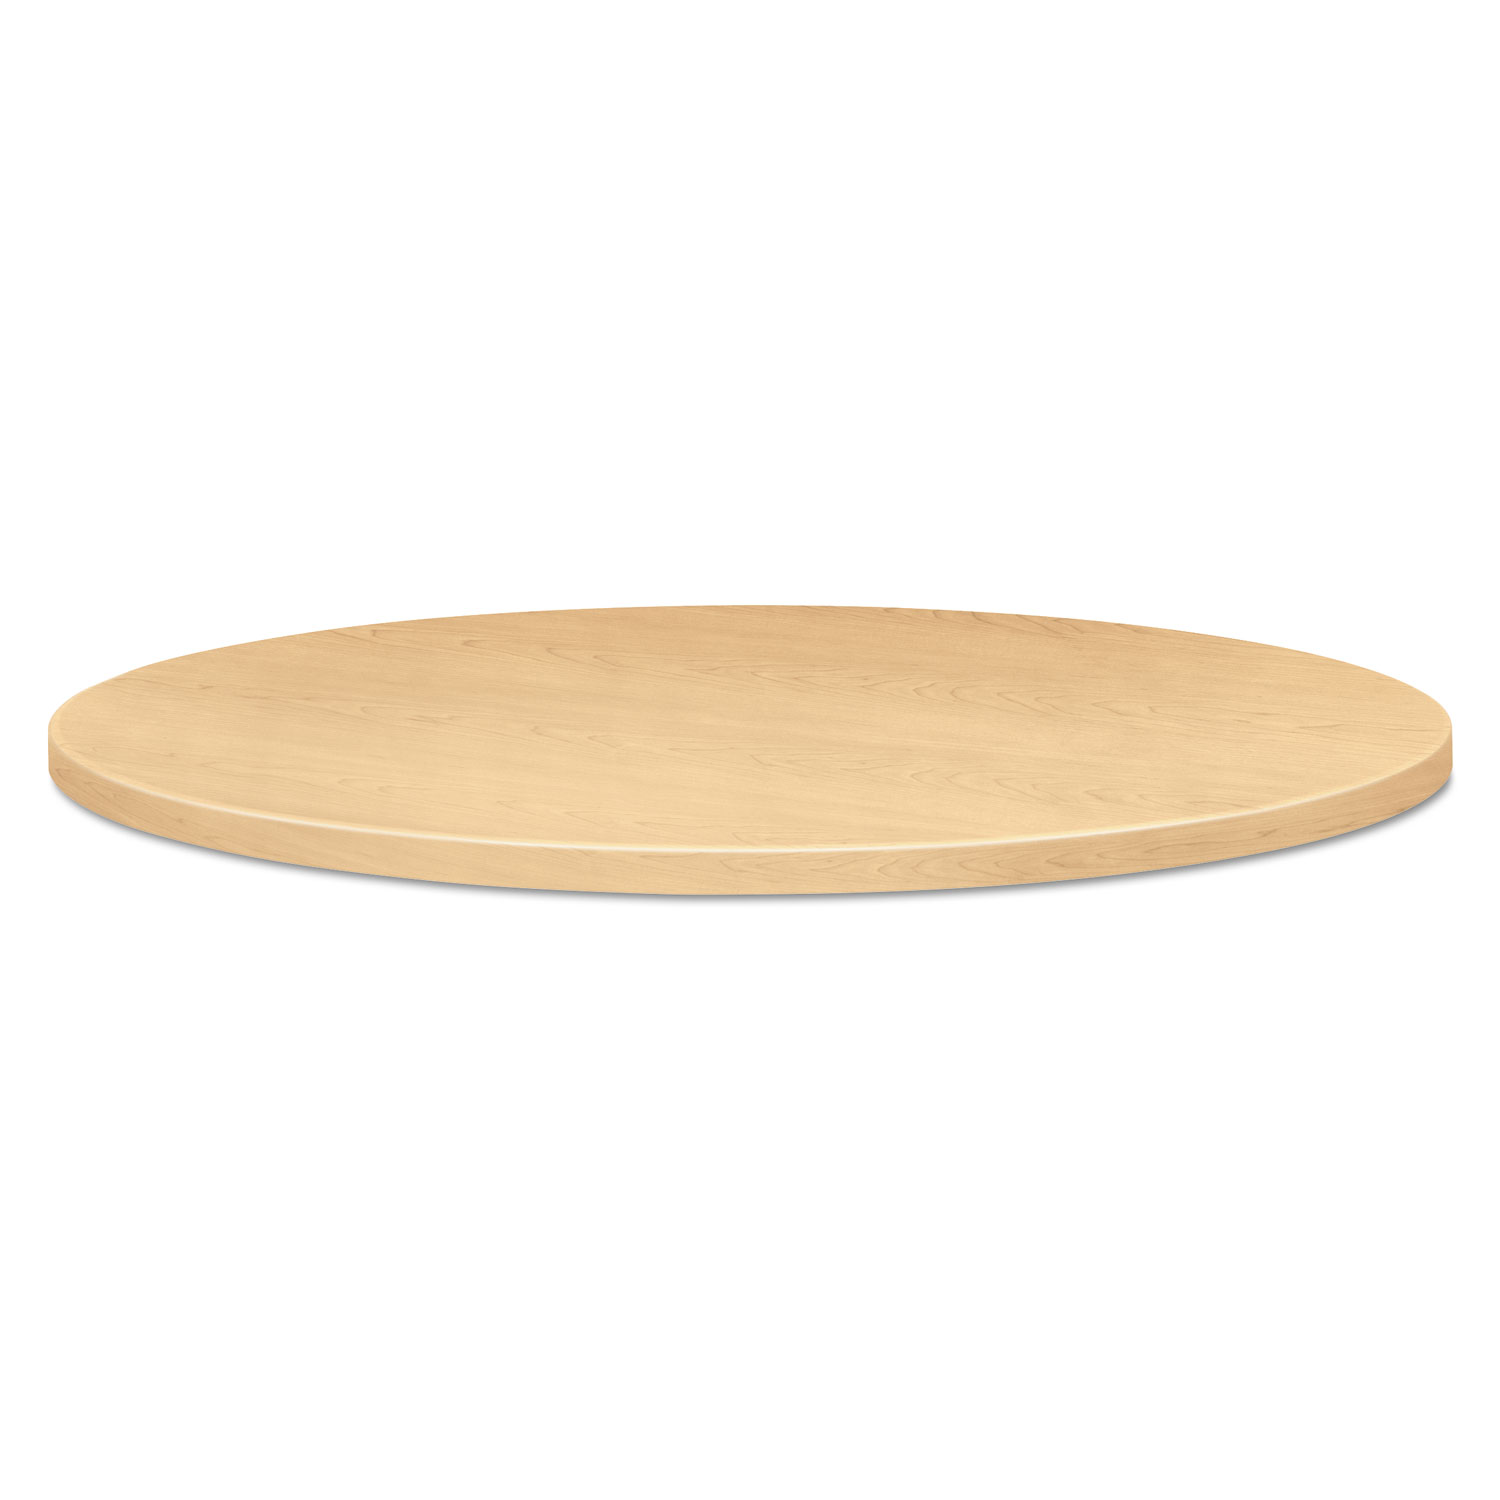 Self-Edge Round Hospitality Table Top, 42 Diameter, Natural Maple